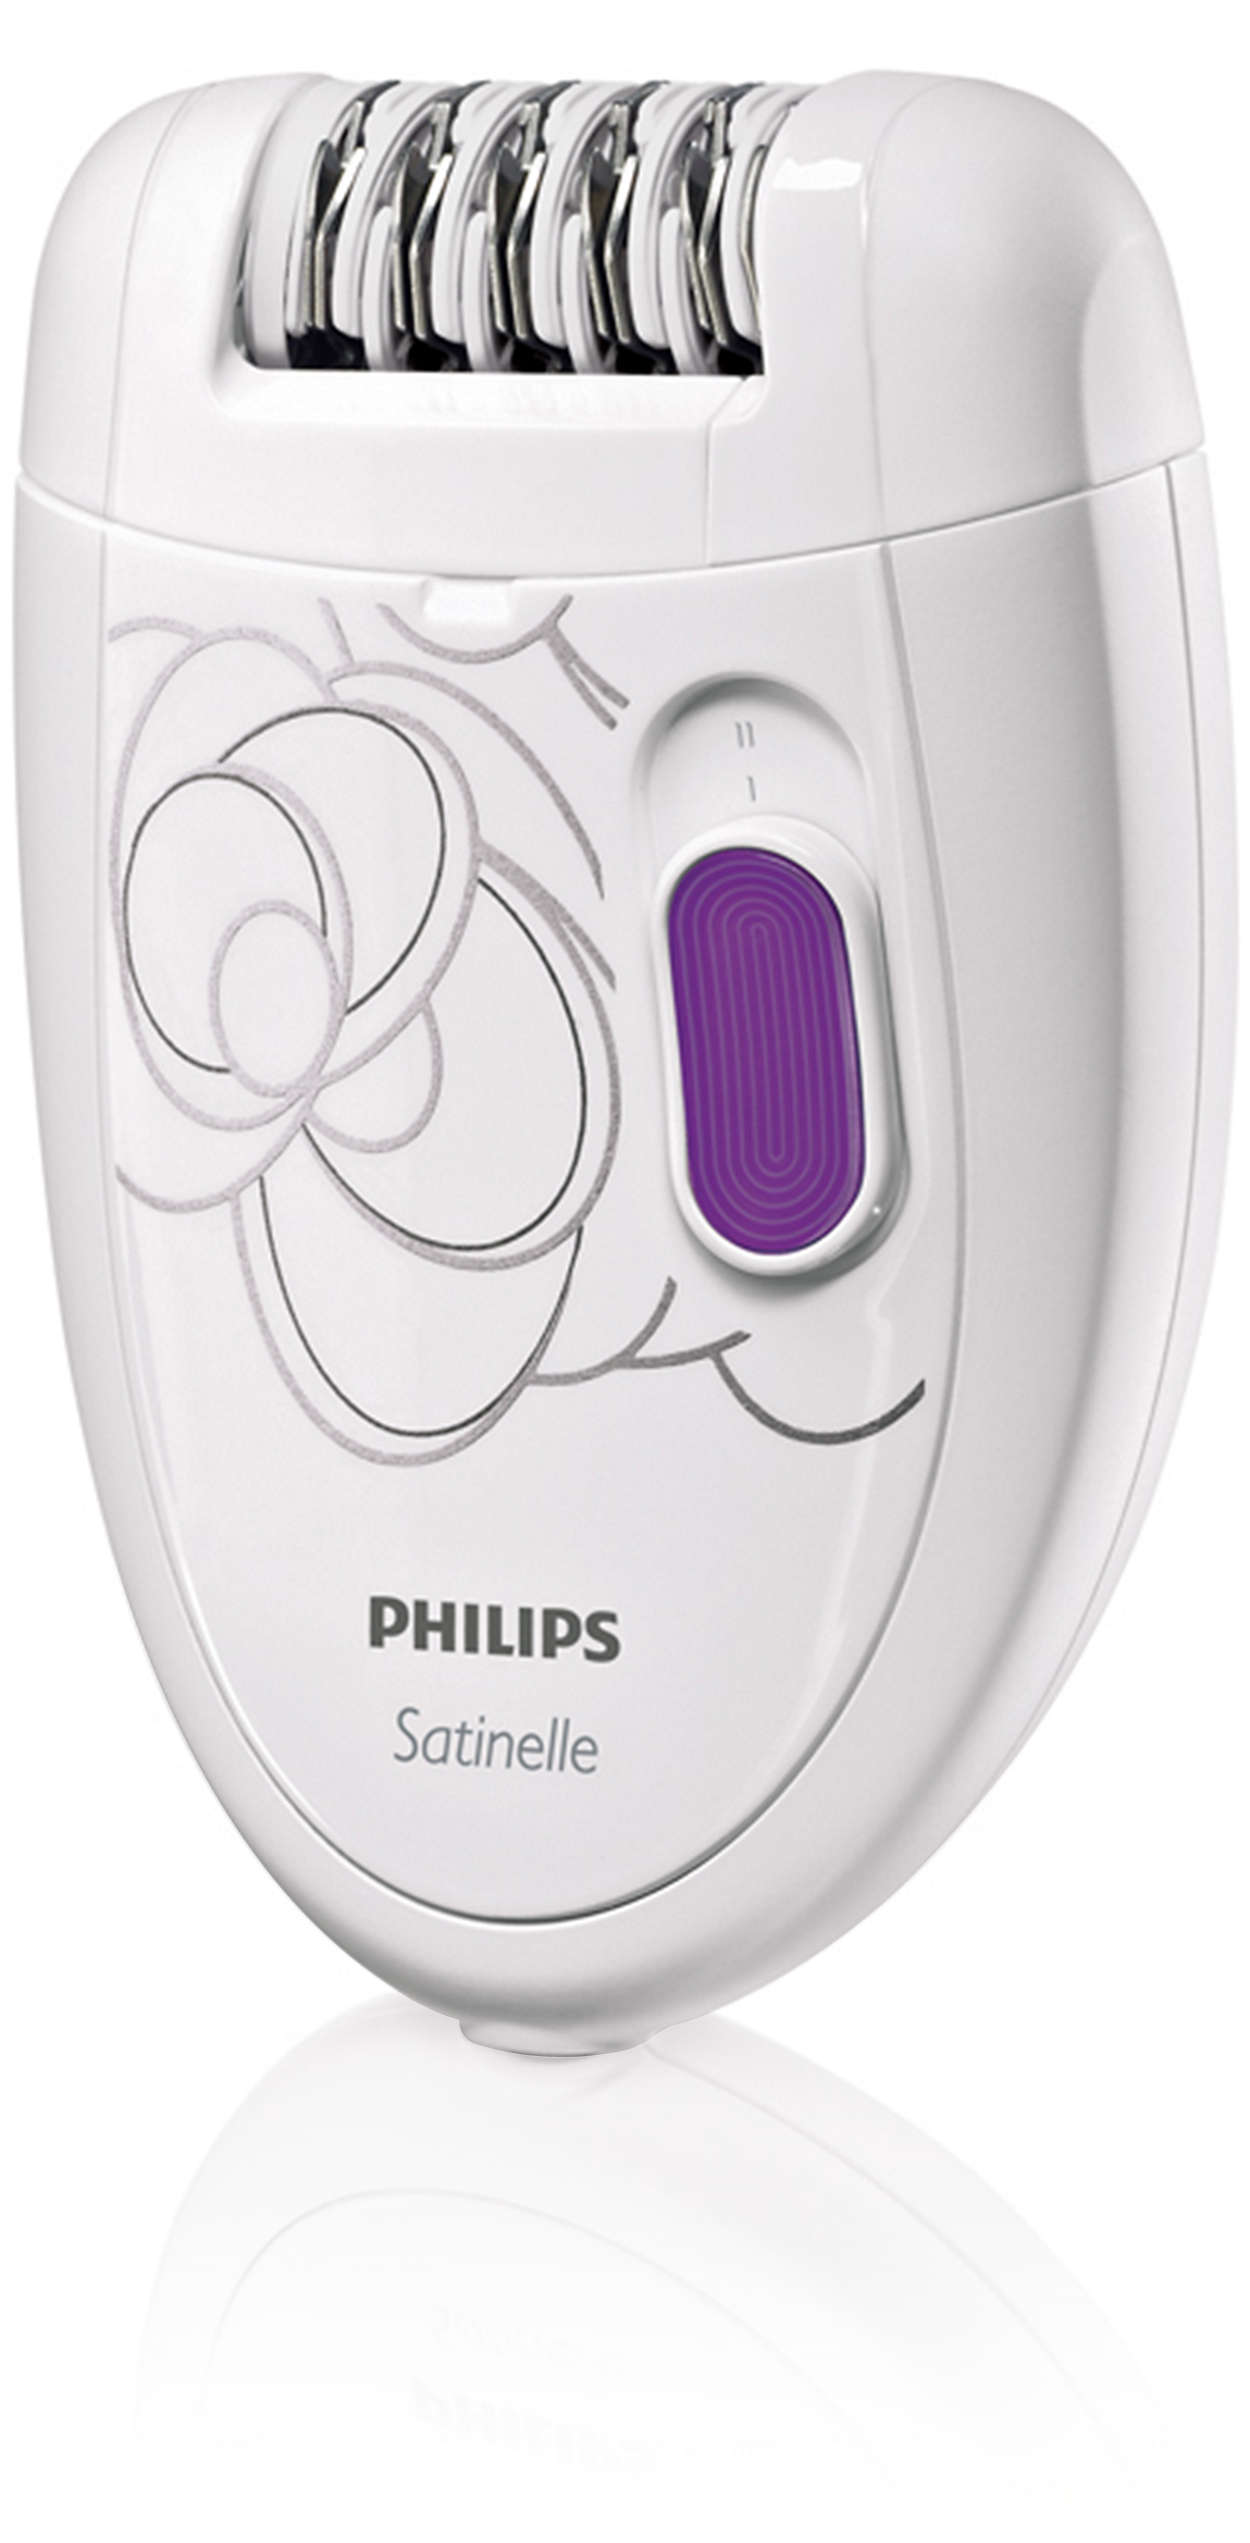 heroine mouse or rat Wreck Satinelle Epilator Satinelle HP6400/00 | Philips